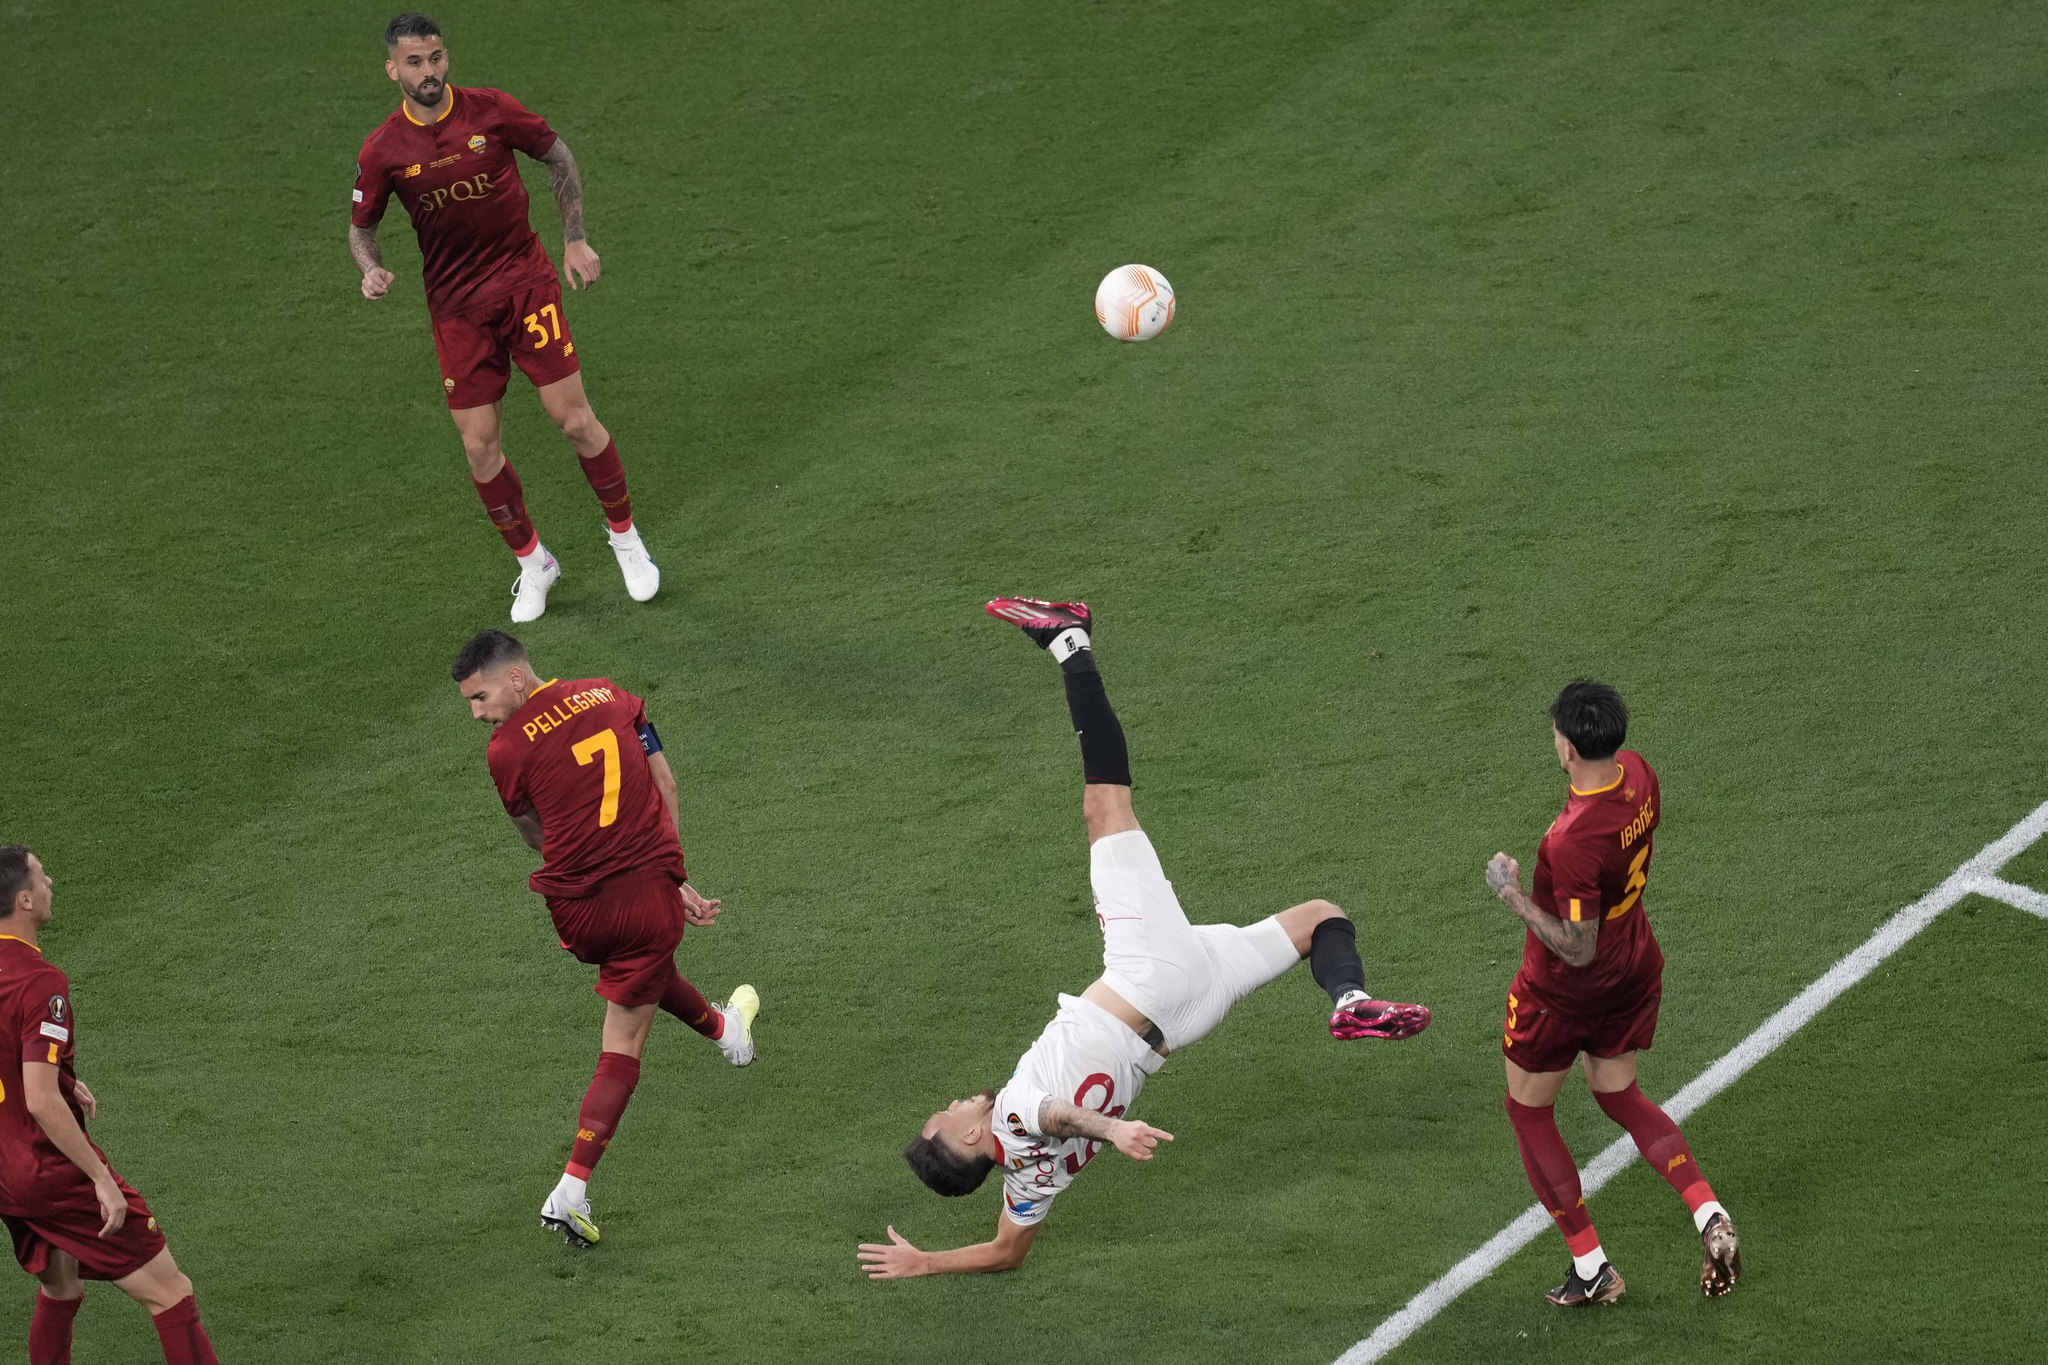 Sevilla's Lucas Ocampos goes for an acrobatic kick during the  lt;HIT gt;Europa lt;/HIT gt;  lt;HIT gt;League lt;/HIT gt; final soccer match between Sevilla and Roma, at the Puskas Arena in Budapest, Hungary, Wednesday, May 31, 2023. (AP Photo/Darko Vojinovic)